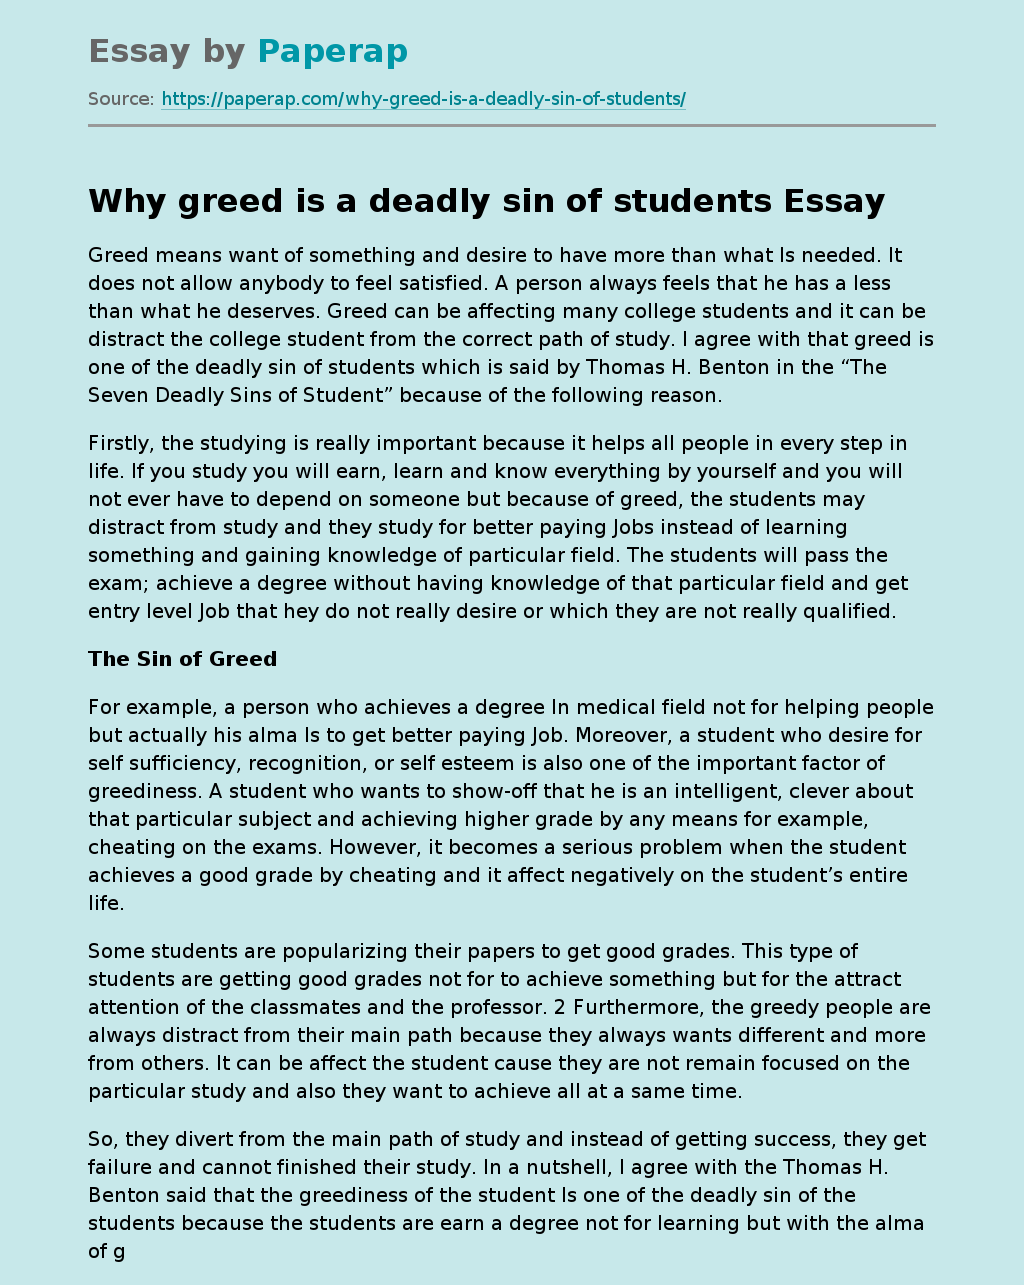 Importance of accounting in economy essay